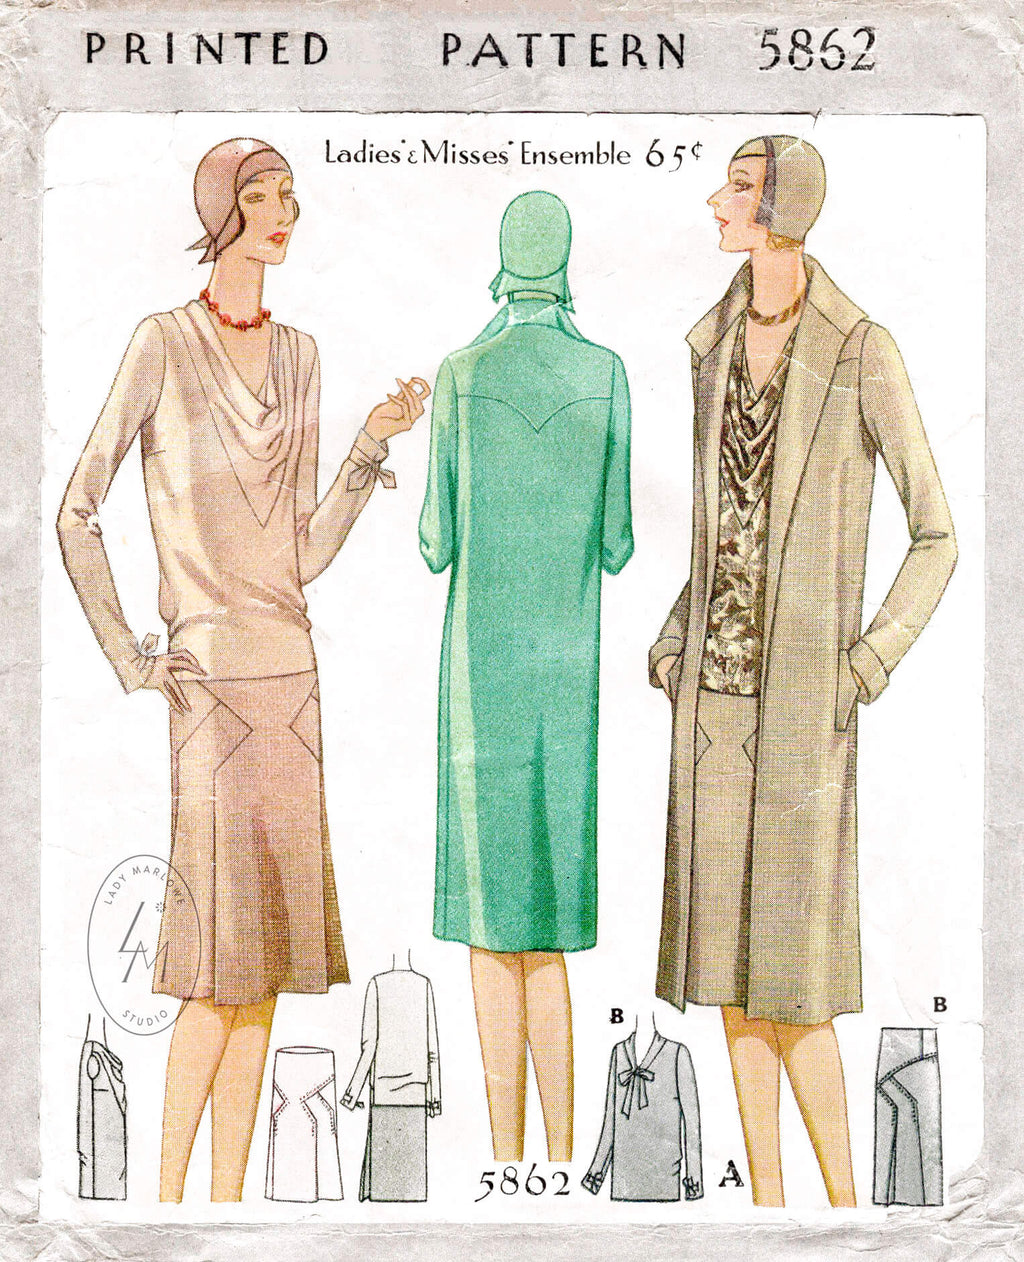 1920s coat and blouse vintage sewing pattern reproduction – Lady Marlowe